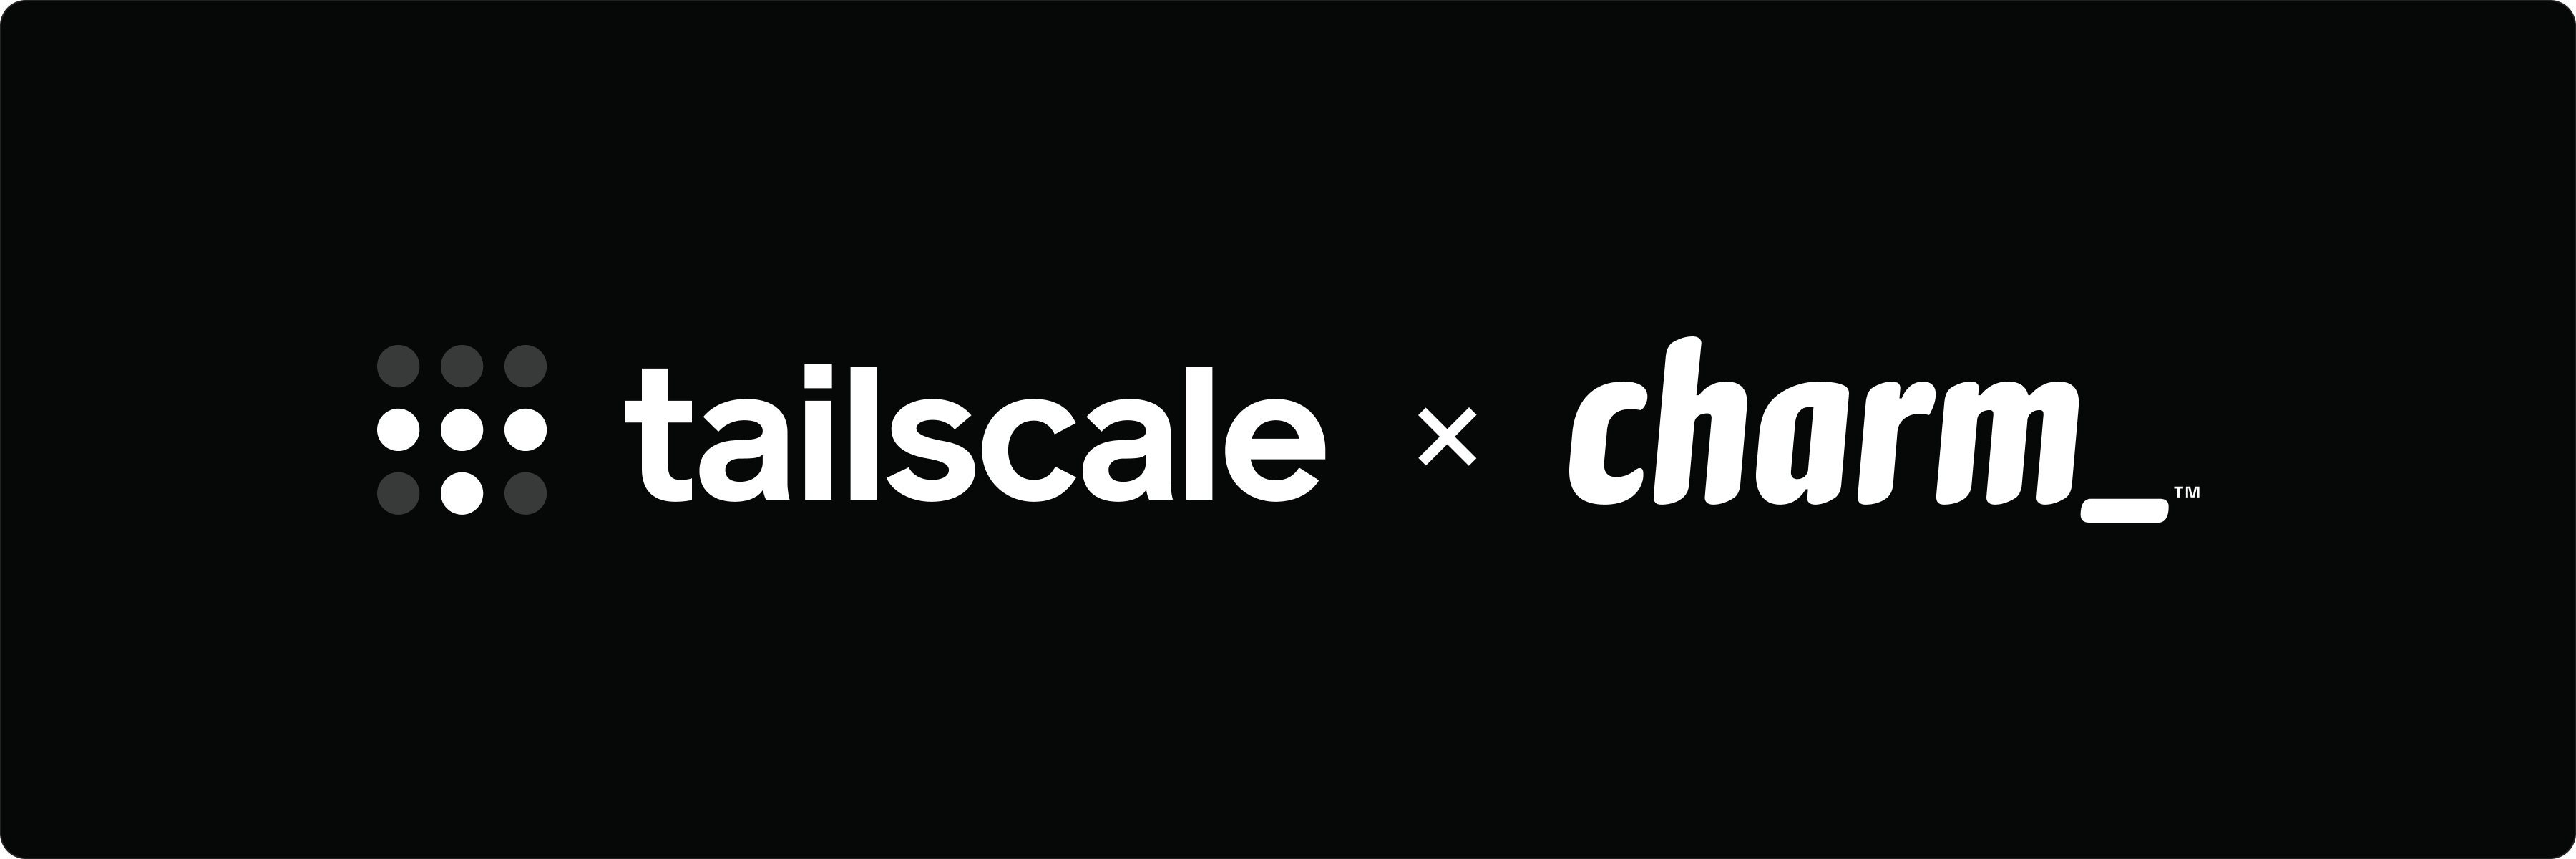 Logos for Tailscale and Charm